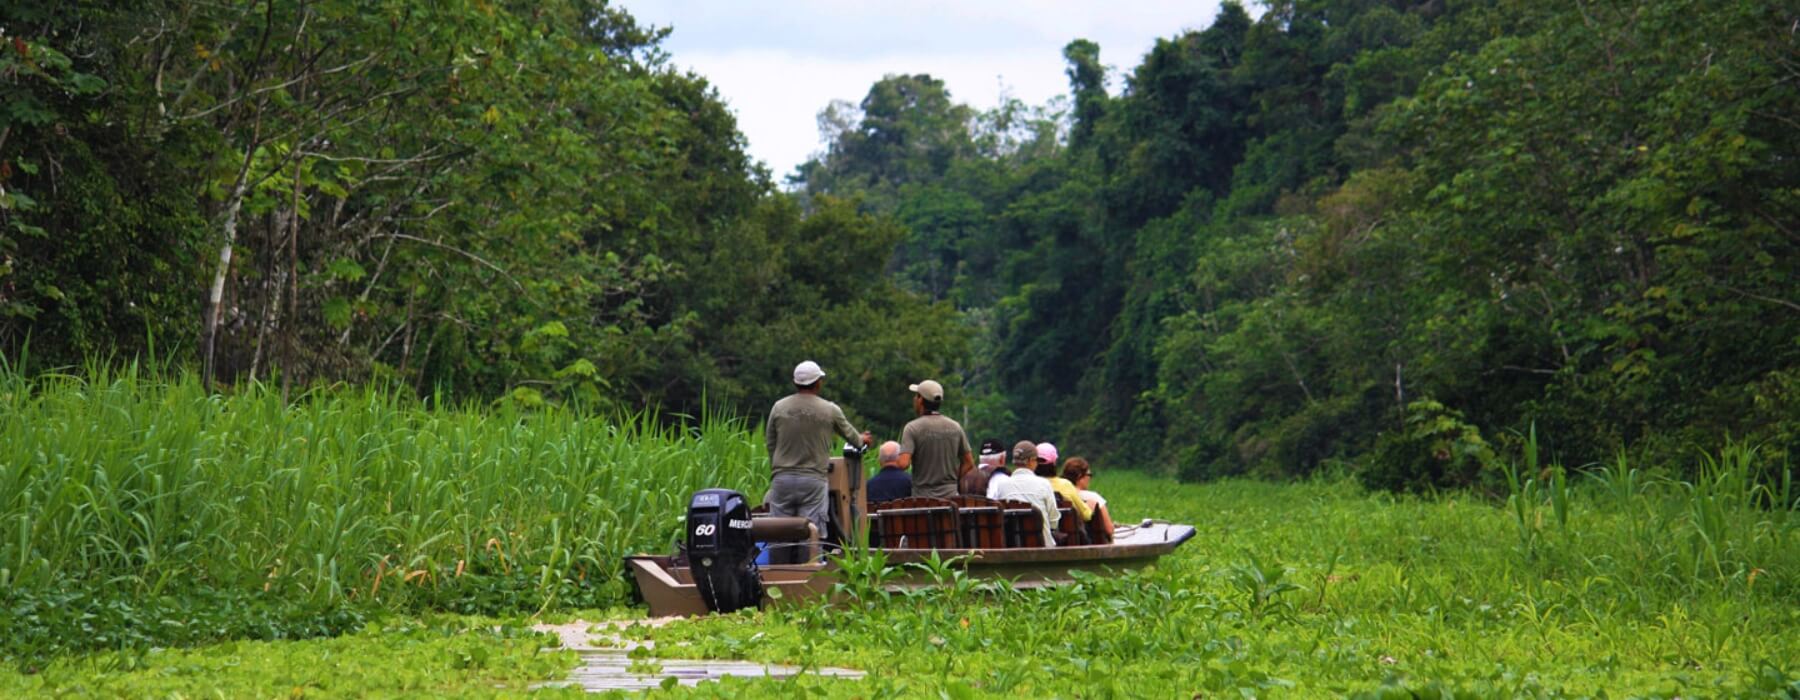 WHICH IS THE BEST AMAZON JUNGLE REGION TO VISIT IN PERU